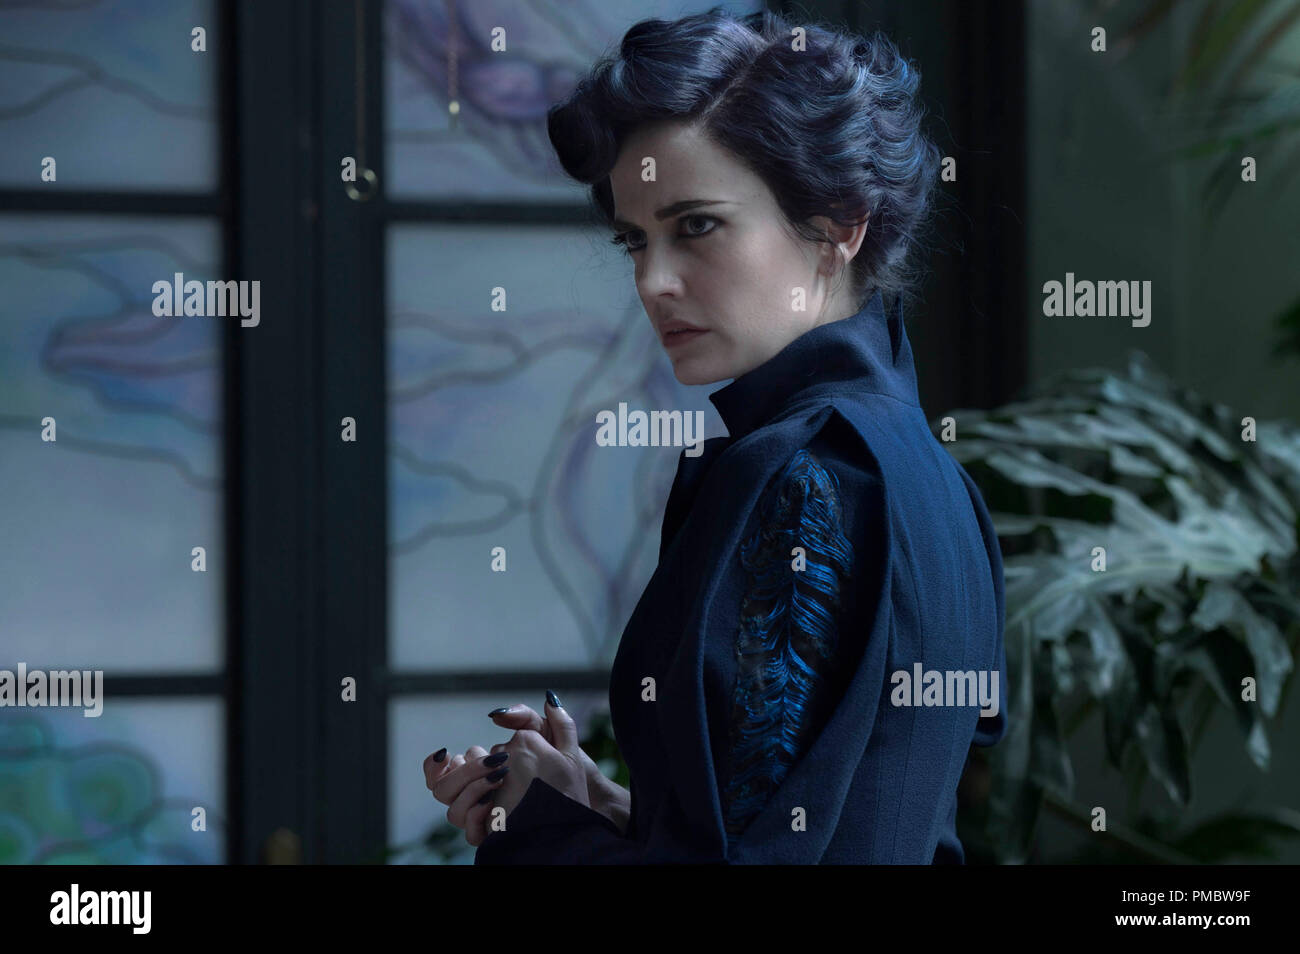 'Miss Peregrine's Home for Peculiar Children' (2016) Eva Green portrays Miss Peregrine, who oversees a magical place that is threatened by powerful enemies. Stock Photo